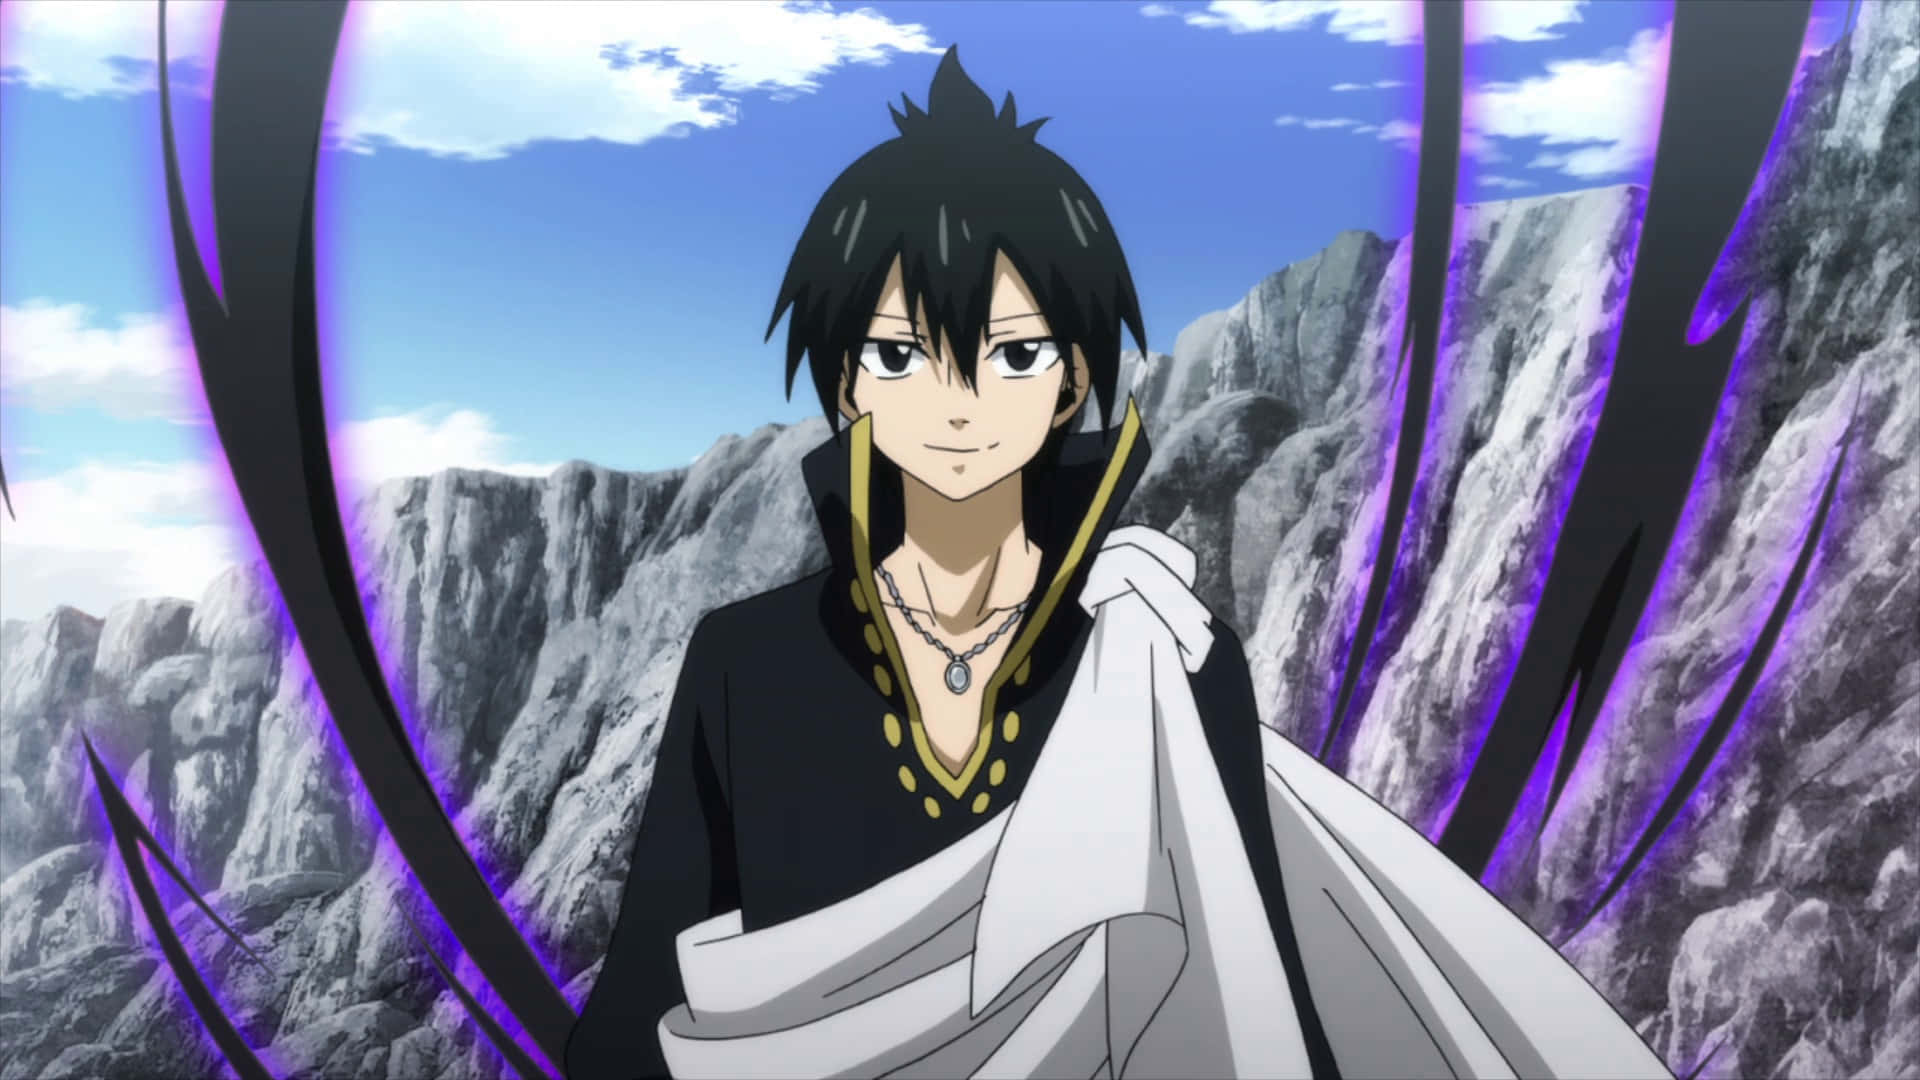 Zeref Dragneel - The Infamous Black Wizard of the Fairy Tail Universe Wallpaper